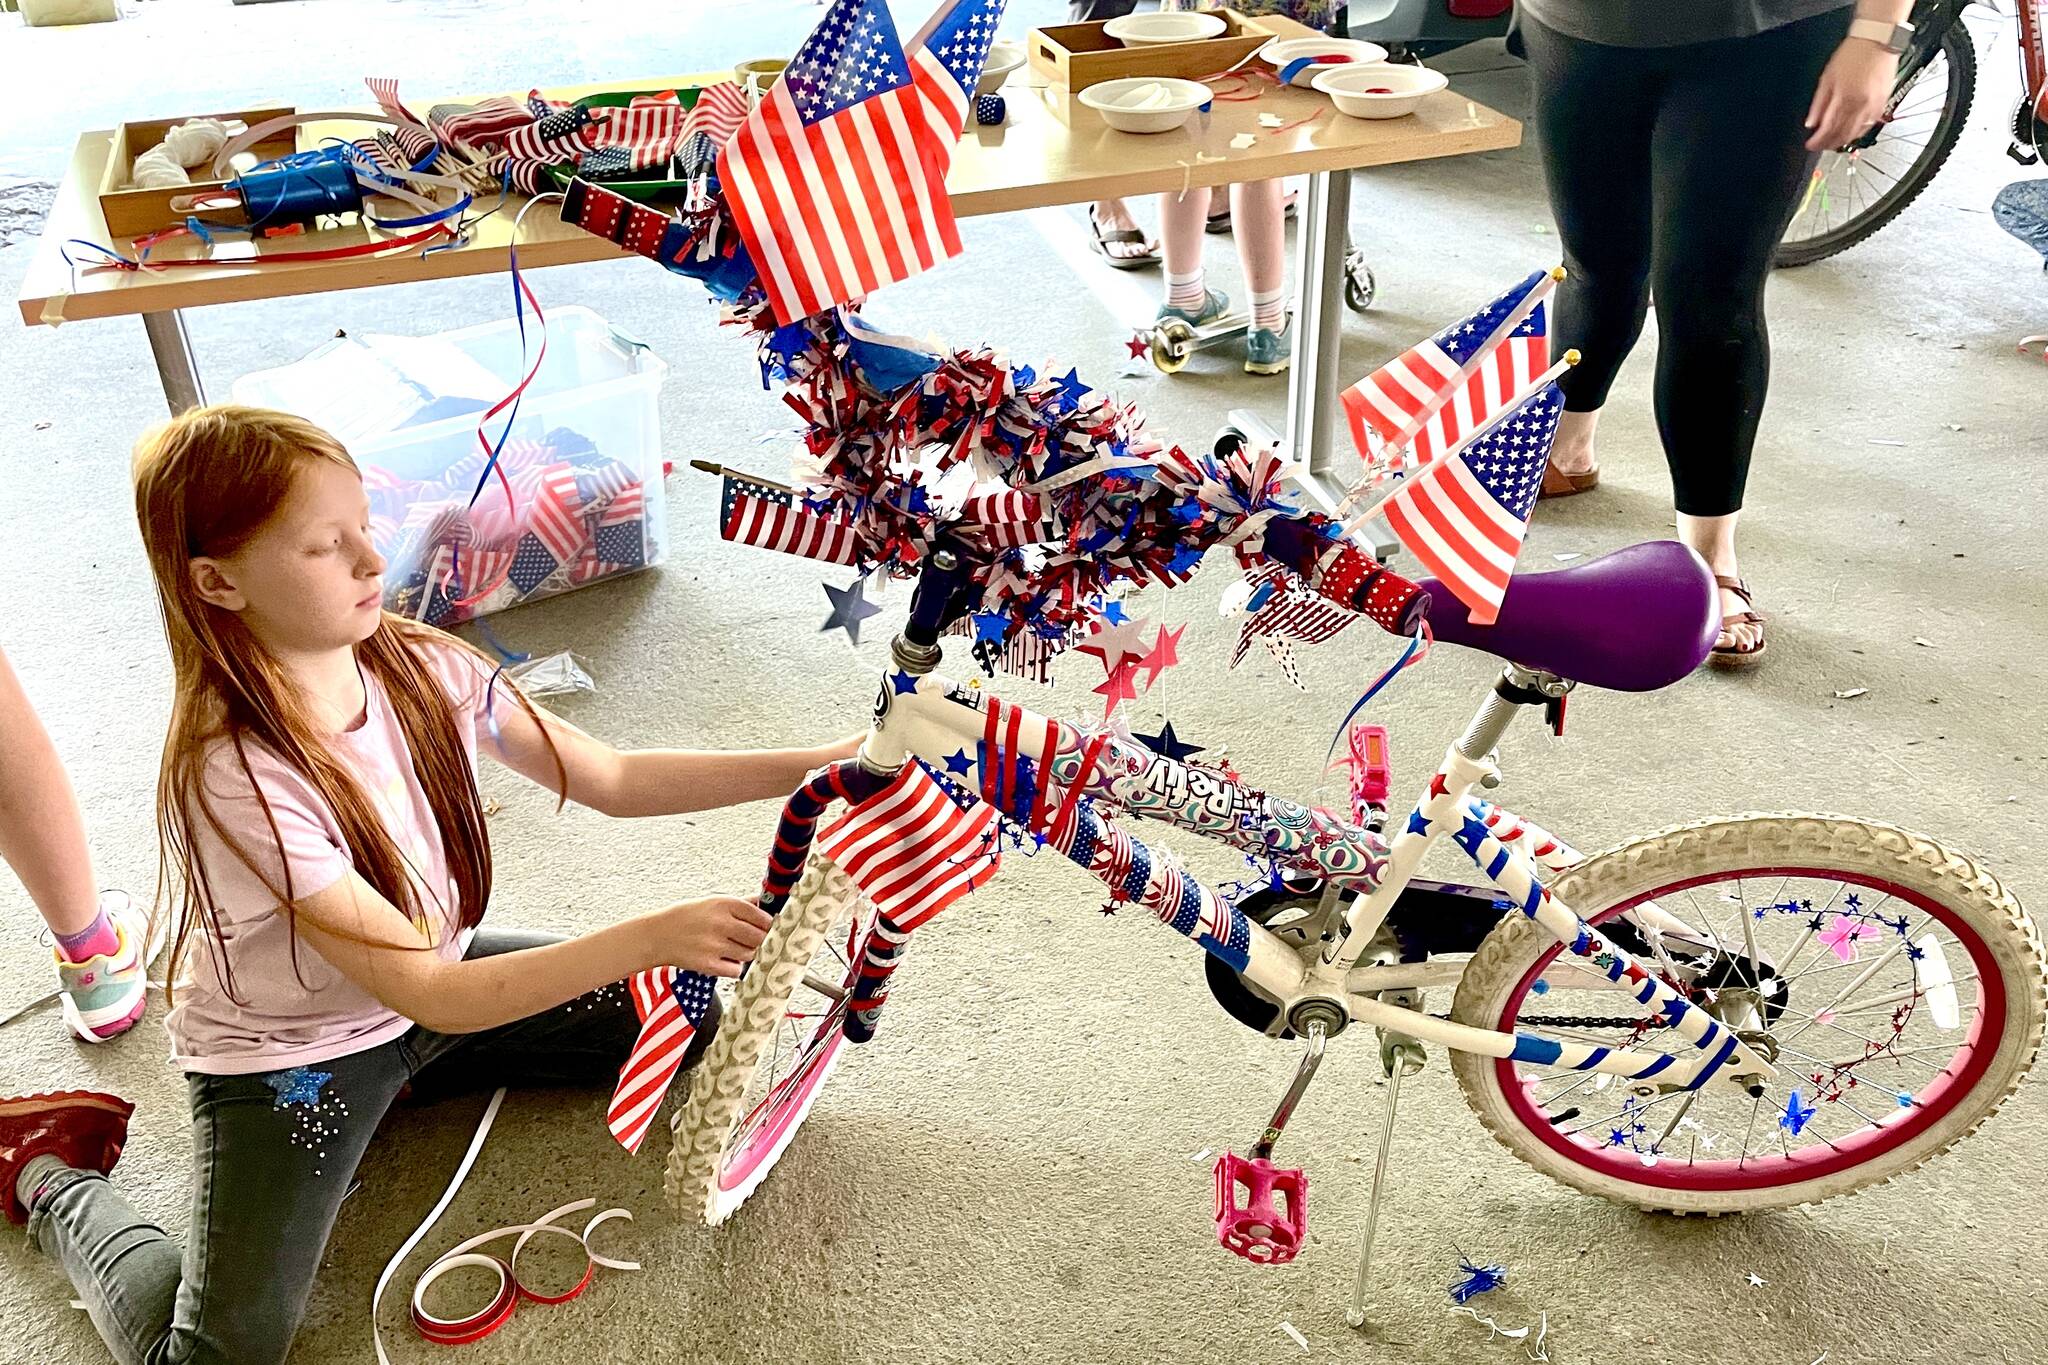 Aoibhinn Reetz executes her creative vision for her bike during the Douglas Fourth of July Committee’s annual Bicycle Decorating session held at the Douglas Public Library on July 2, 2022. (Michael S. Lockett / Juneau Empire)